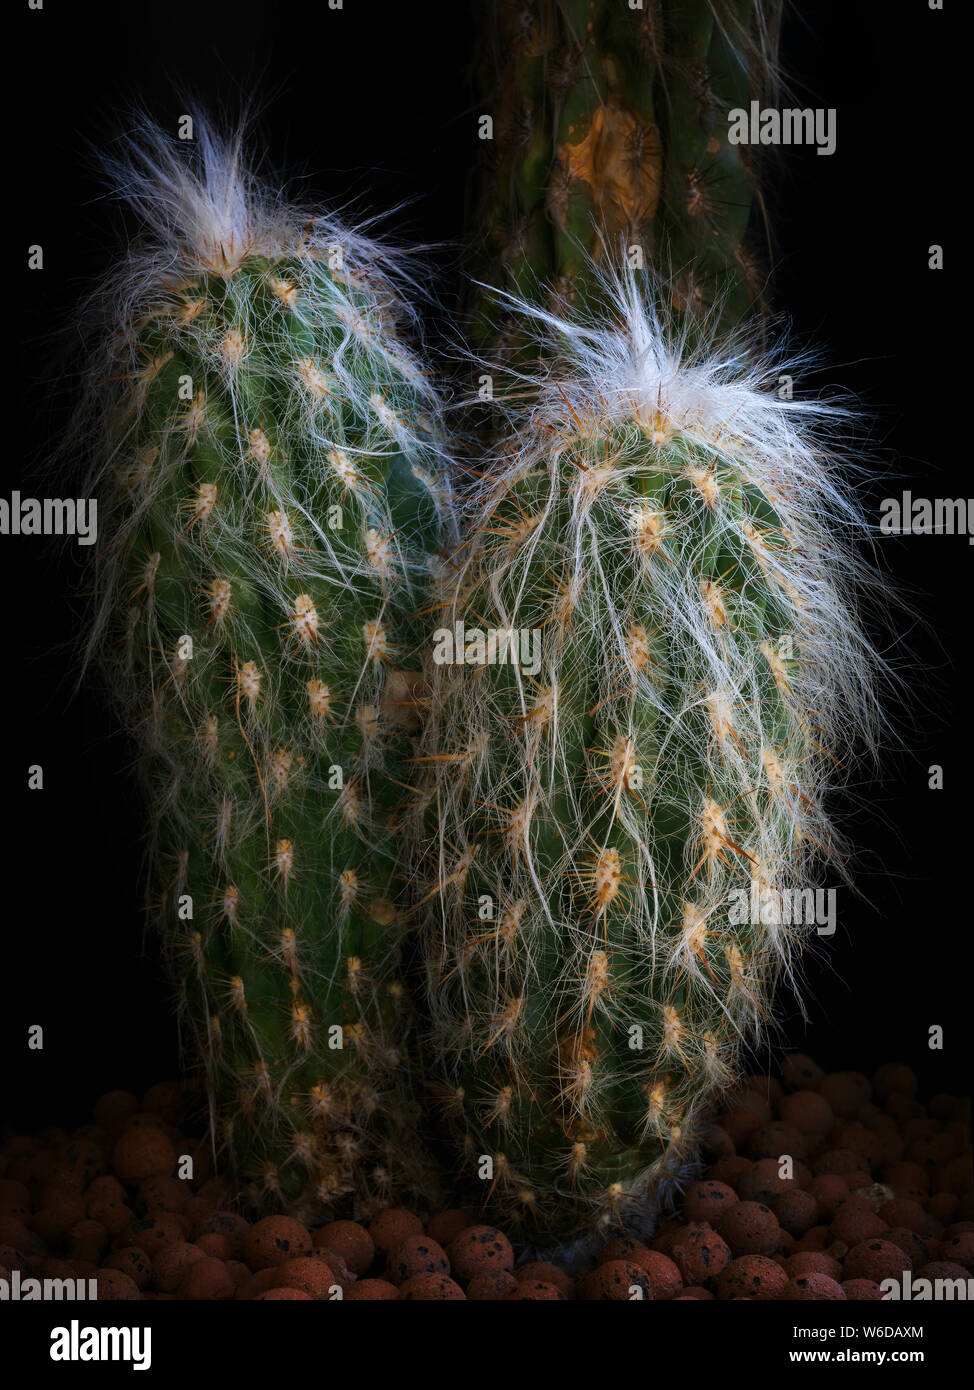 Cactus against black background. Cactaceae plant, arborescent, with branched trunk covered by short radial yellow spines with brown tip. The succulent Stock Photo